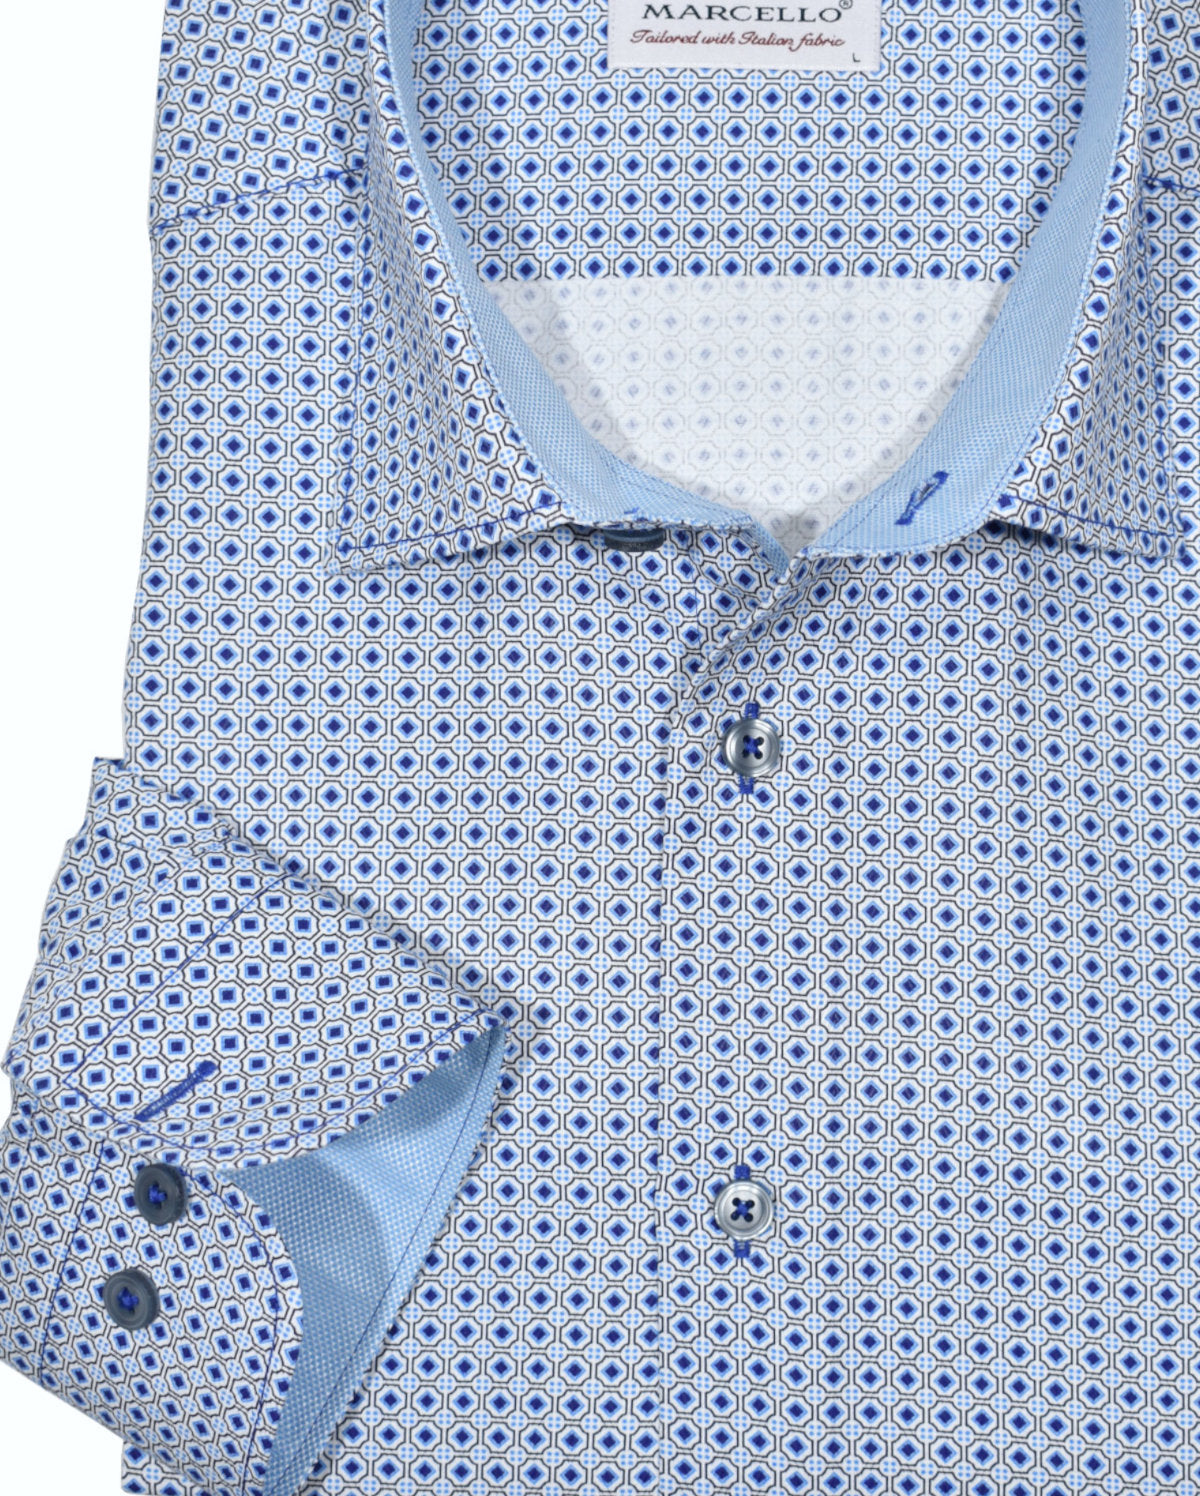 Fine pique cotton fabric with a classic geometric medallion print. White ground shirt with classic navy colors and a hint of teal accents.  Contrast stitching.  Medium collar.